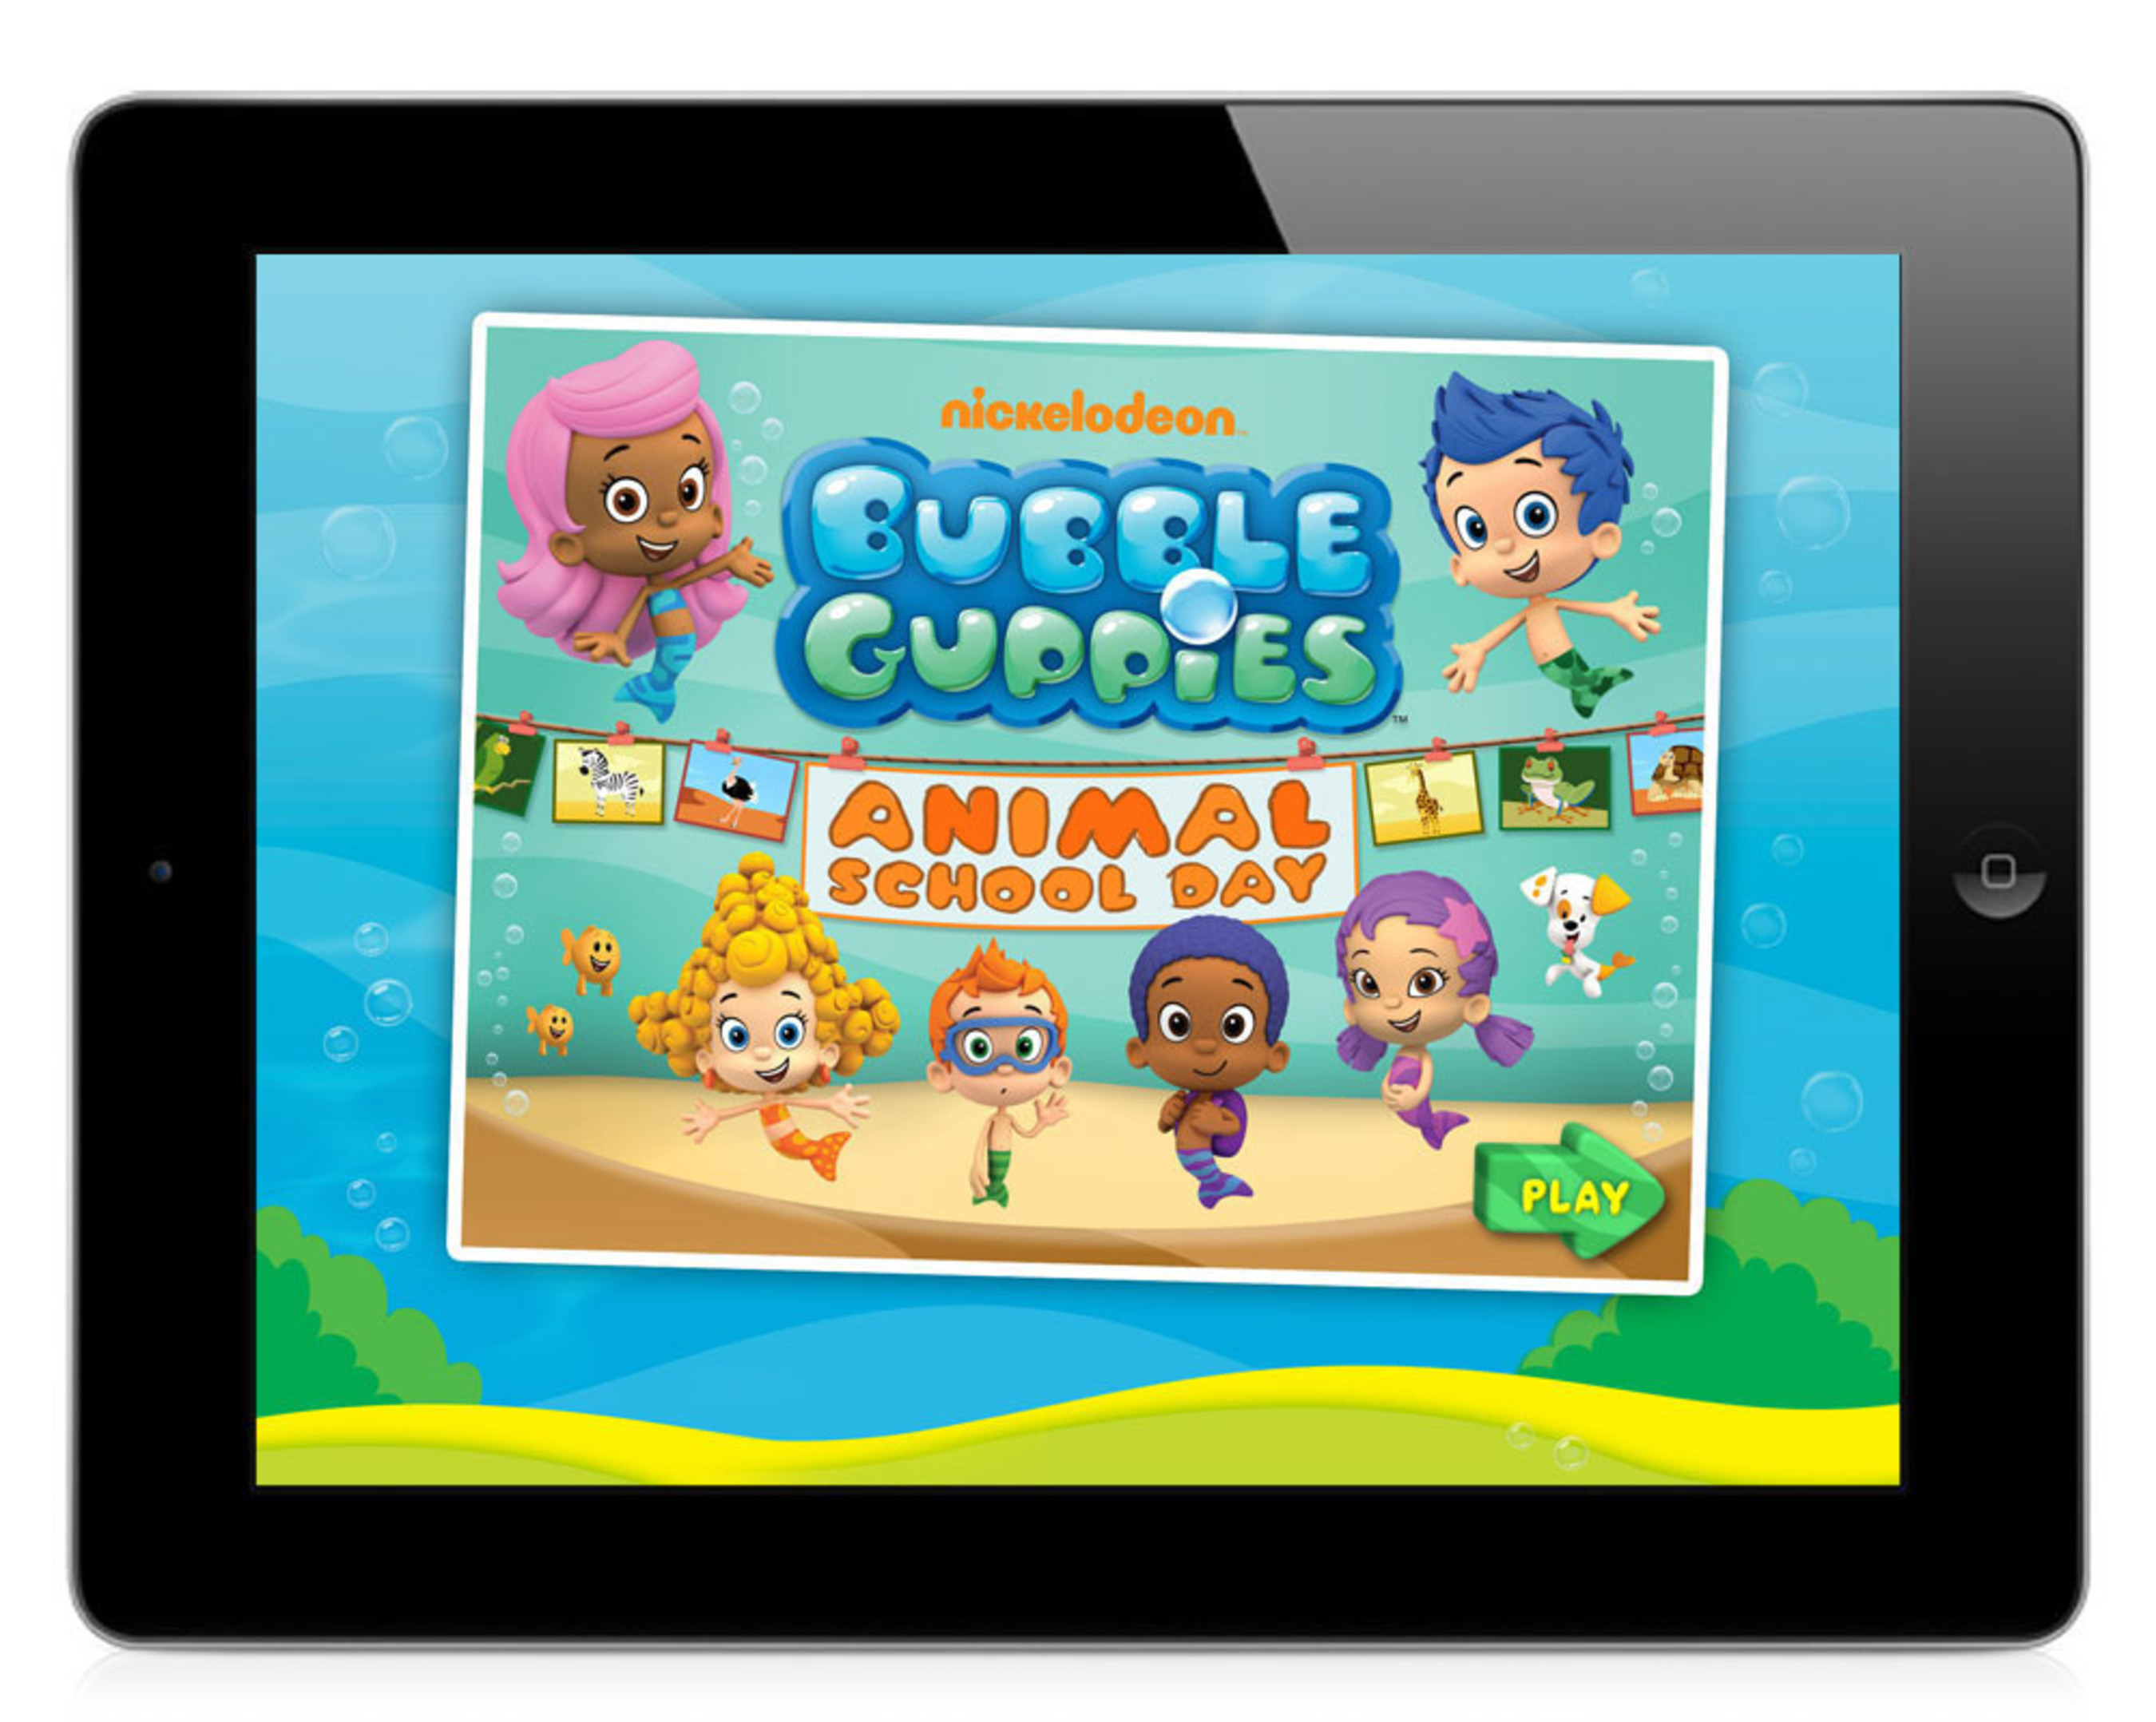 Nickelodeon's Brand-New Educational Mobile App, Bubble Guppies: Animal  School Day!, Hits Top Spots Within 48 Hours of Launch